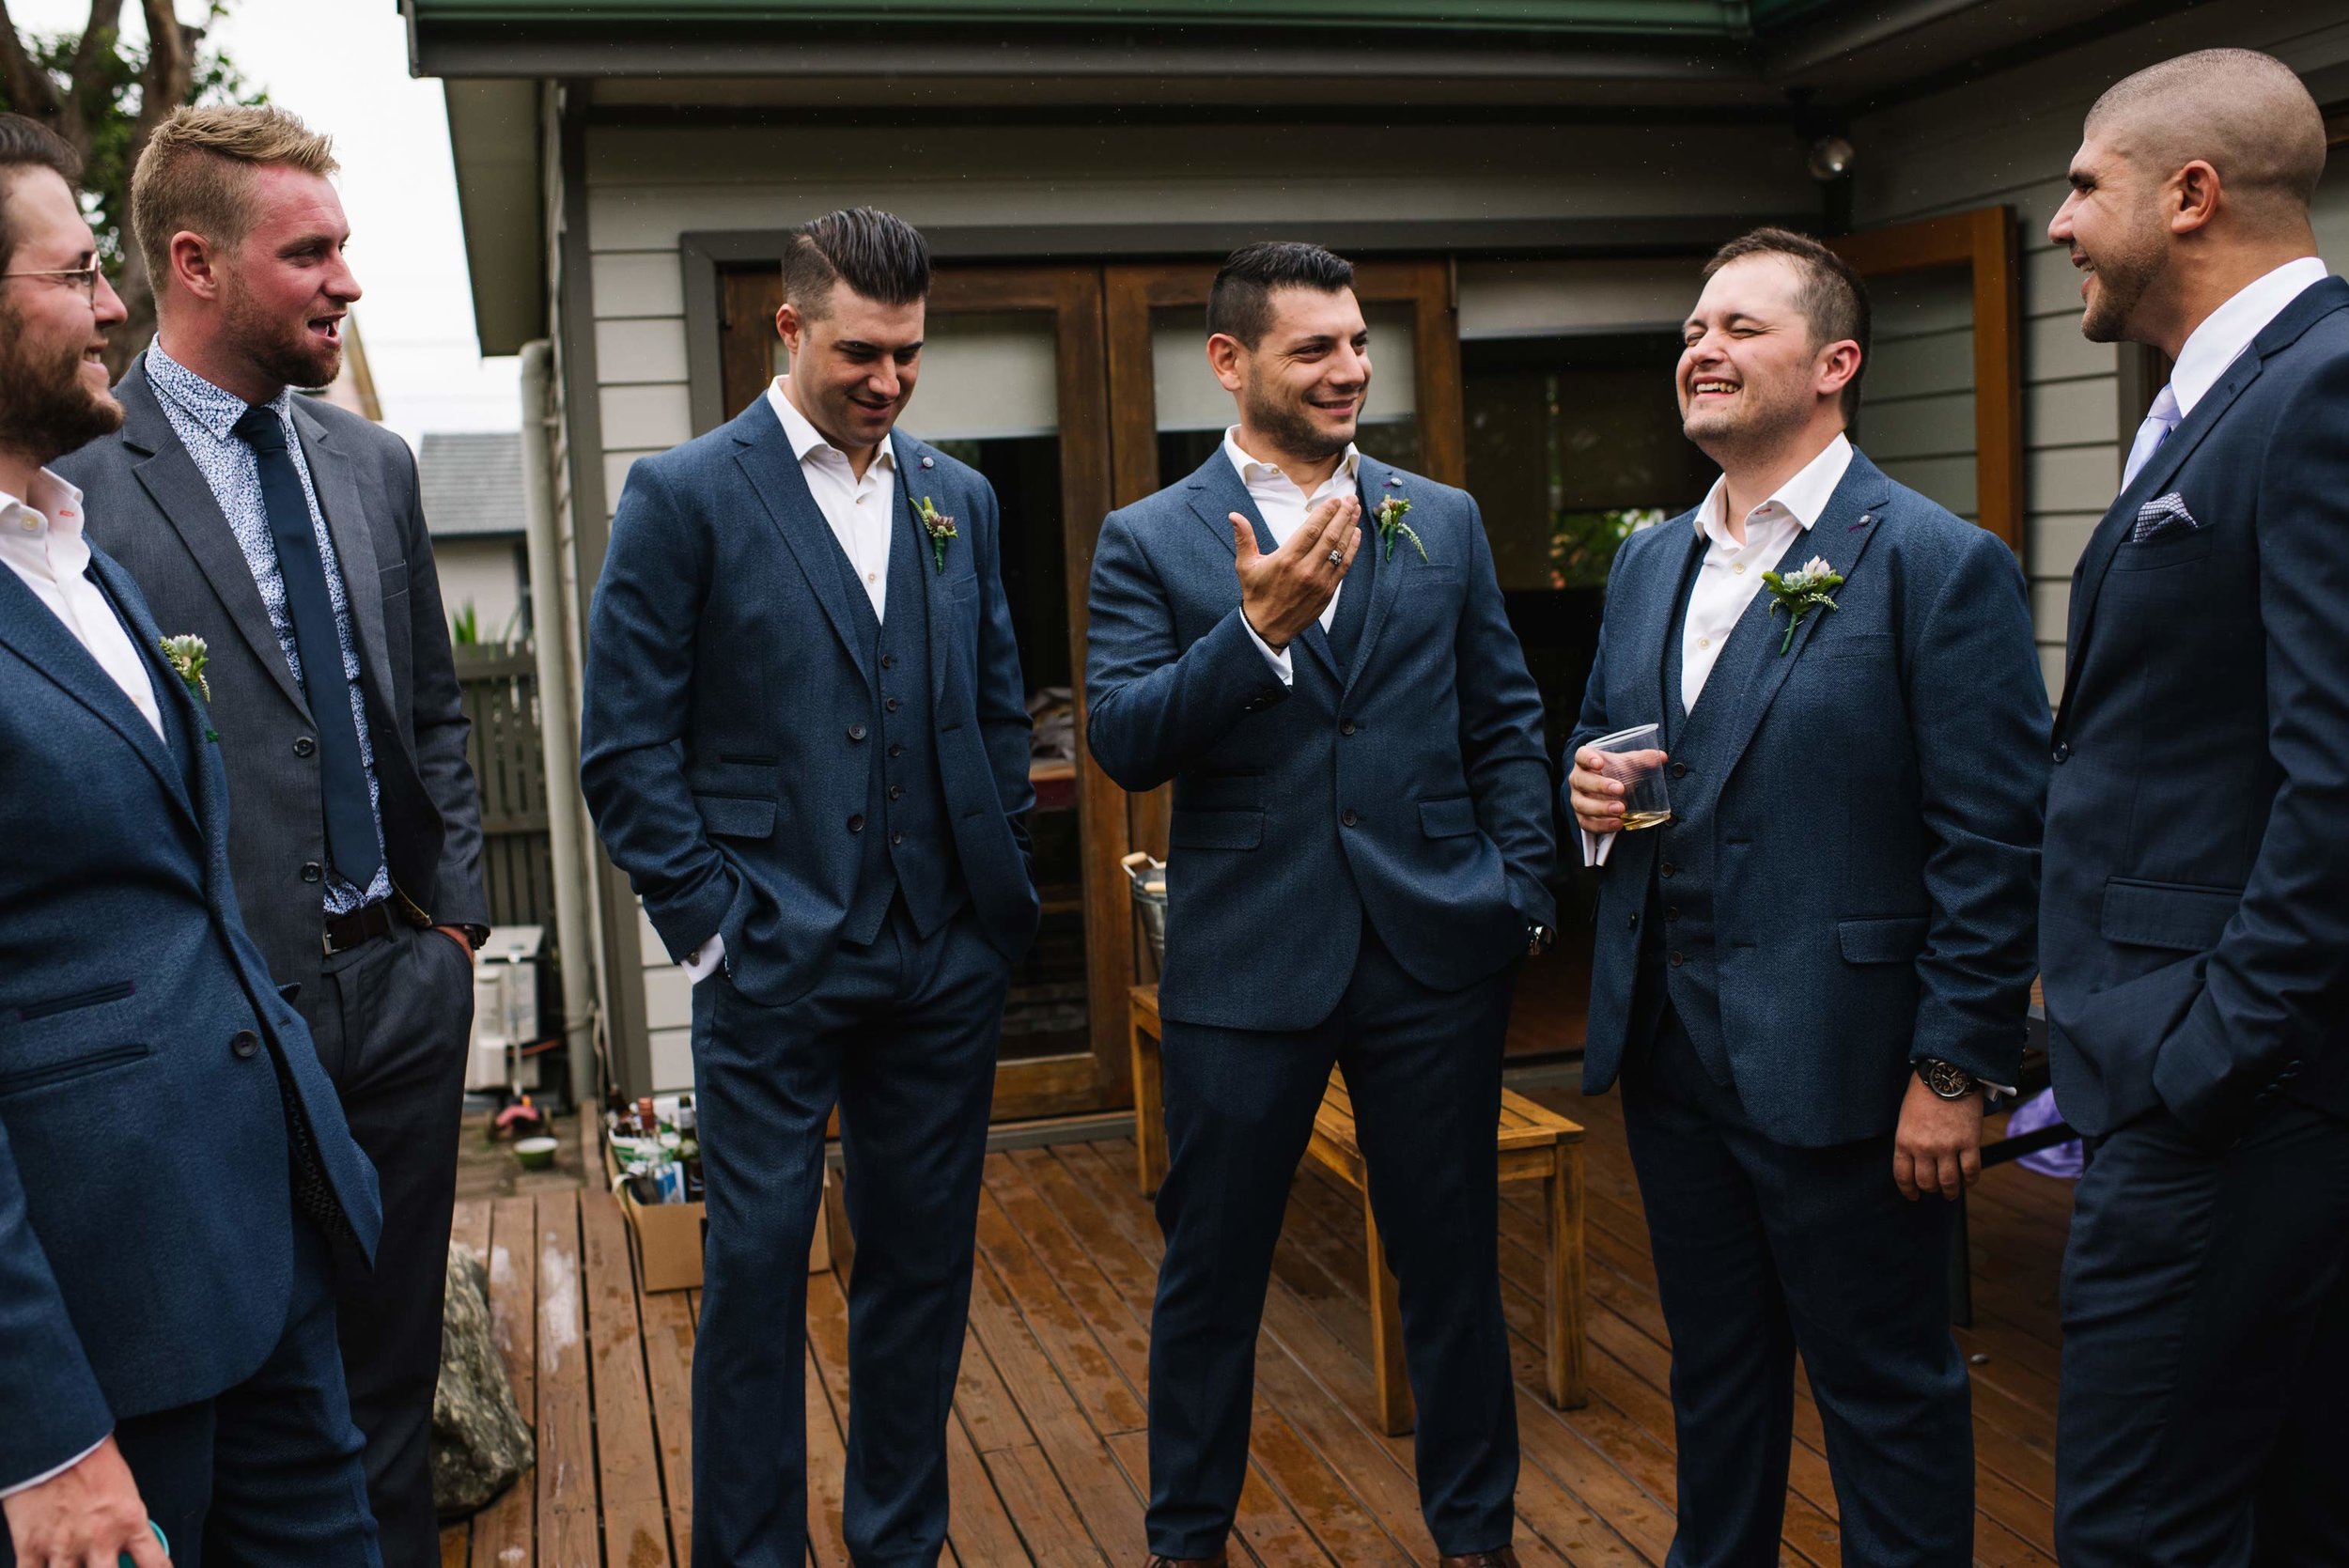 Groomsmen and groom laughing before ceremony